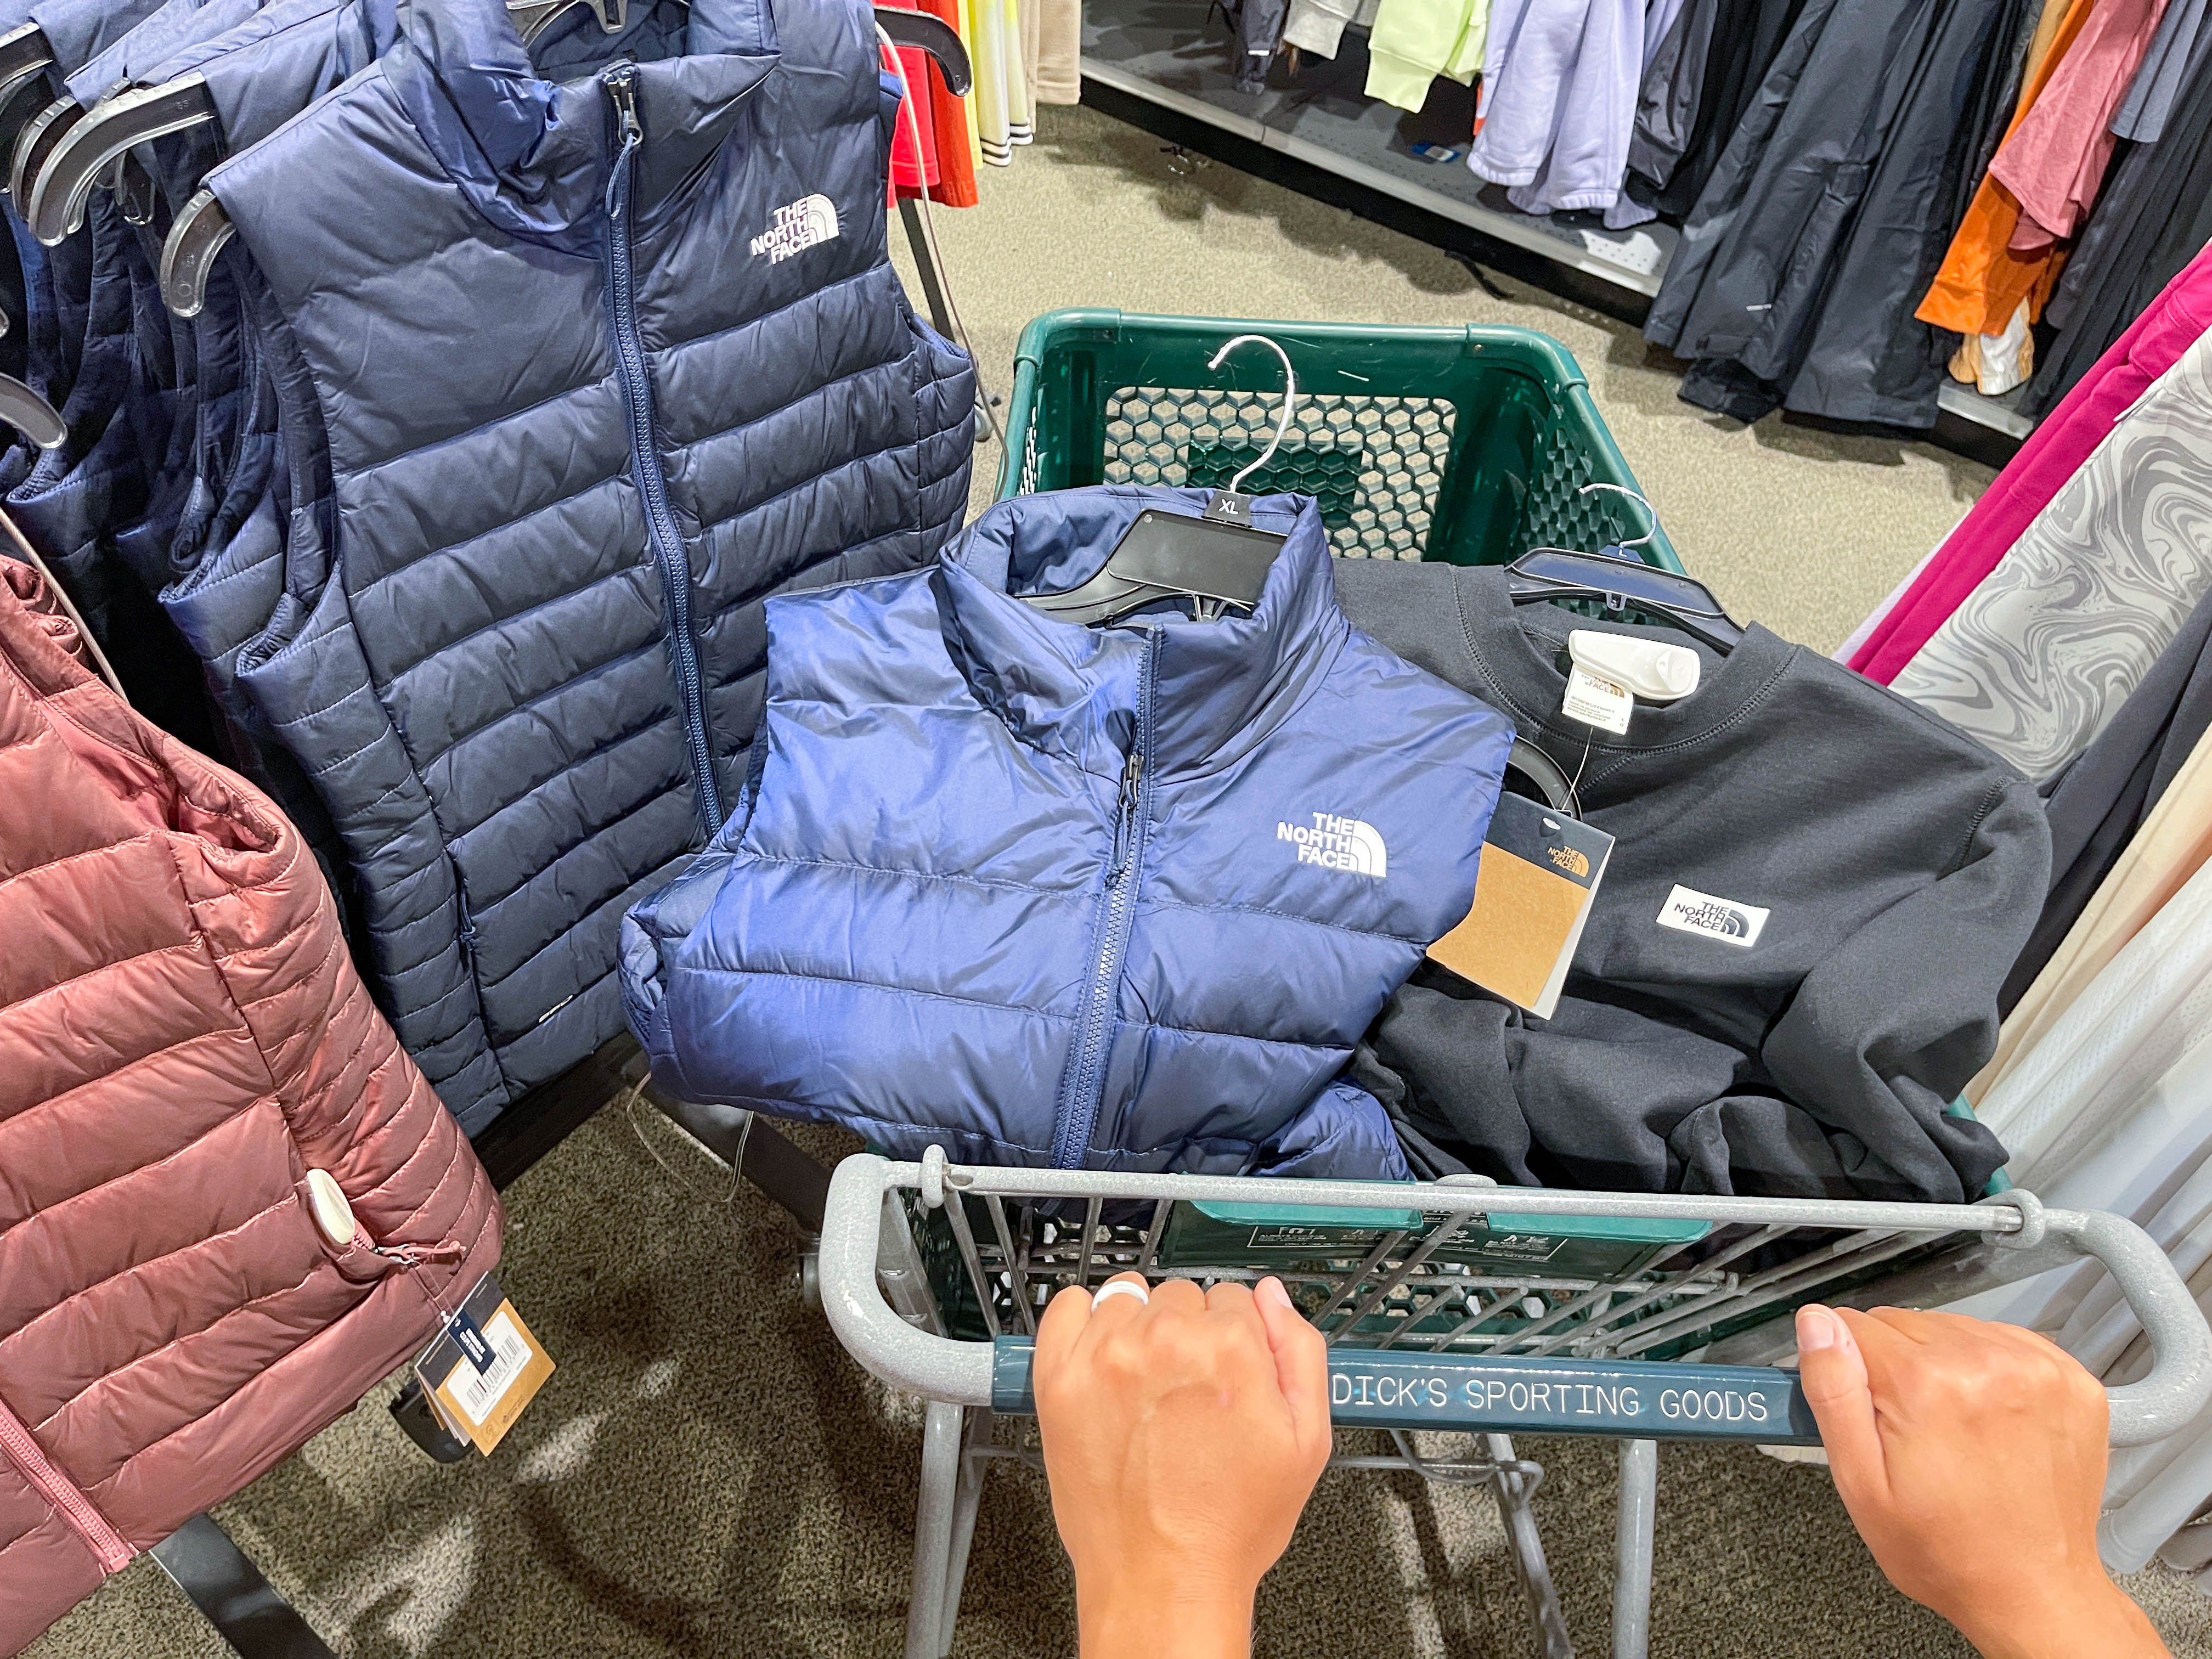 gips Ontdooien, ontdooien, vorst ontdooien verloving The North Face Black Friday 2022: Tips to Save - The Krazy Coupon Lady